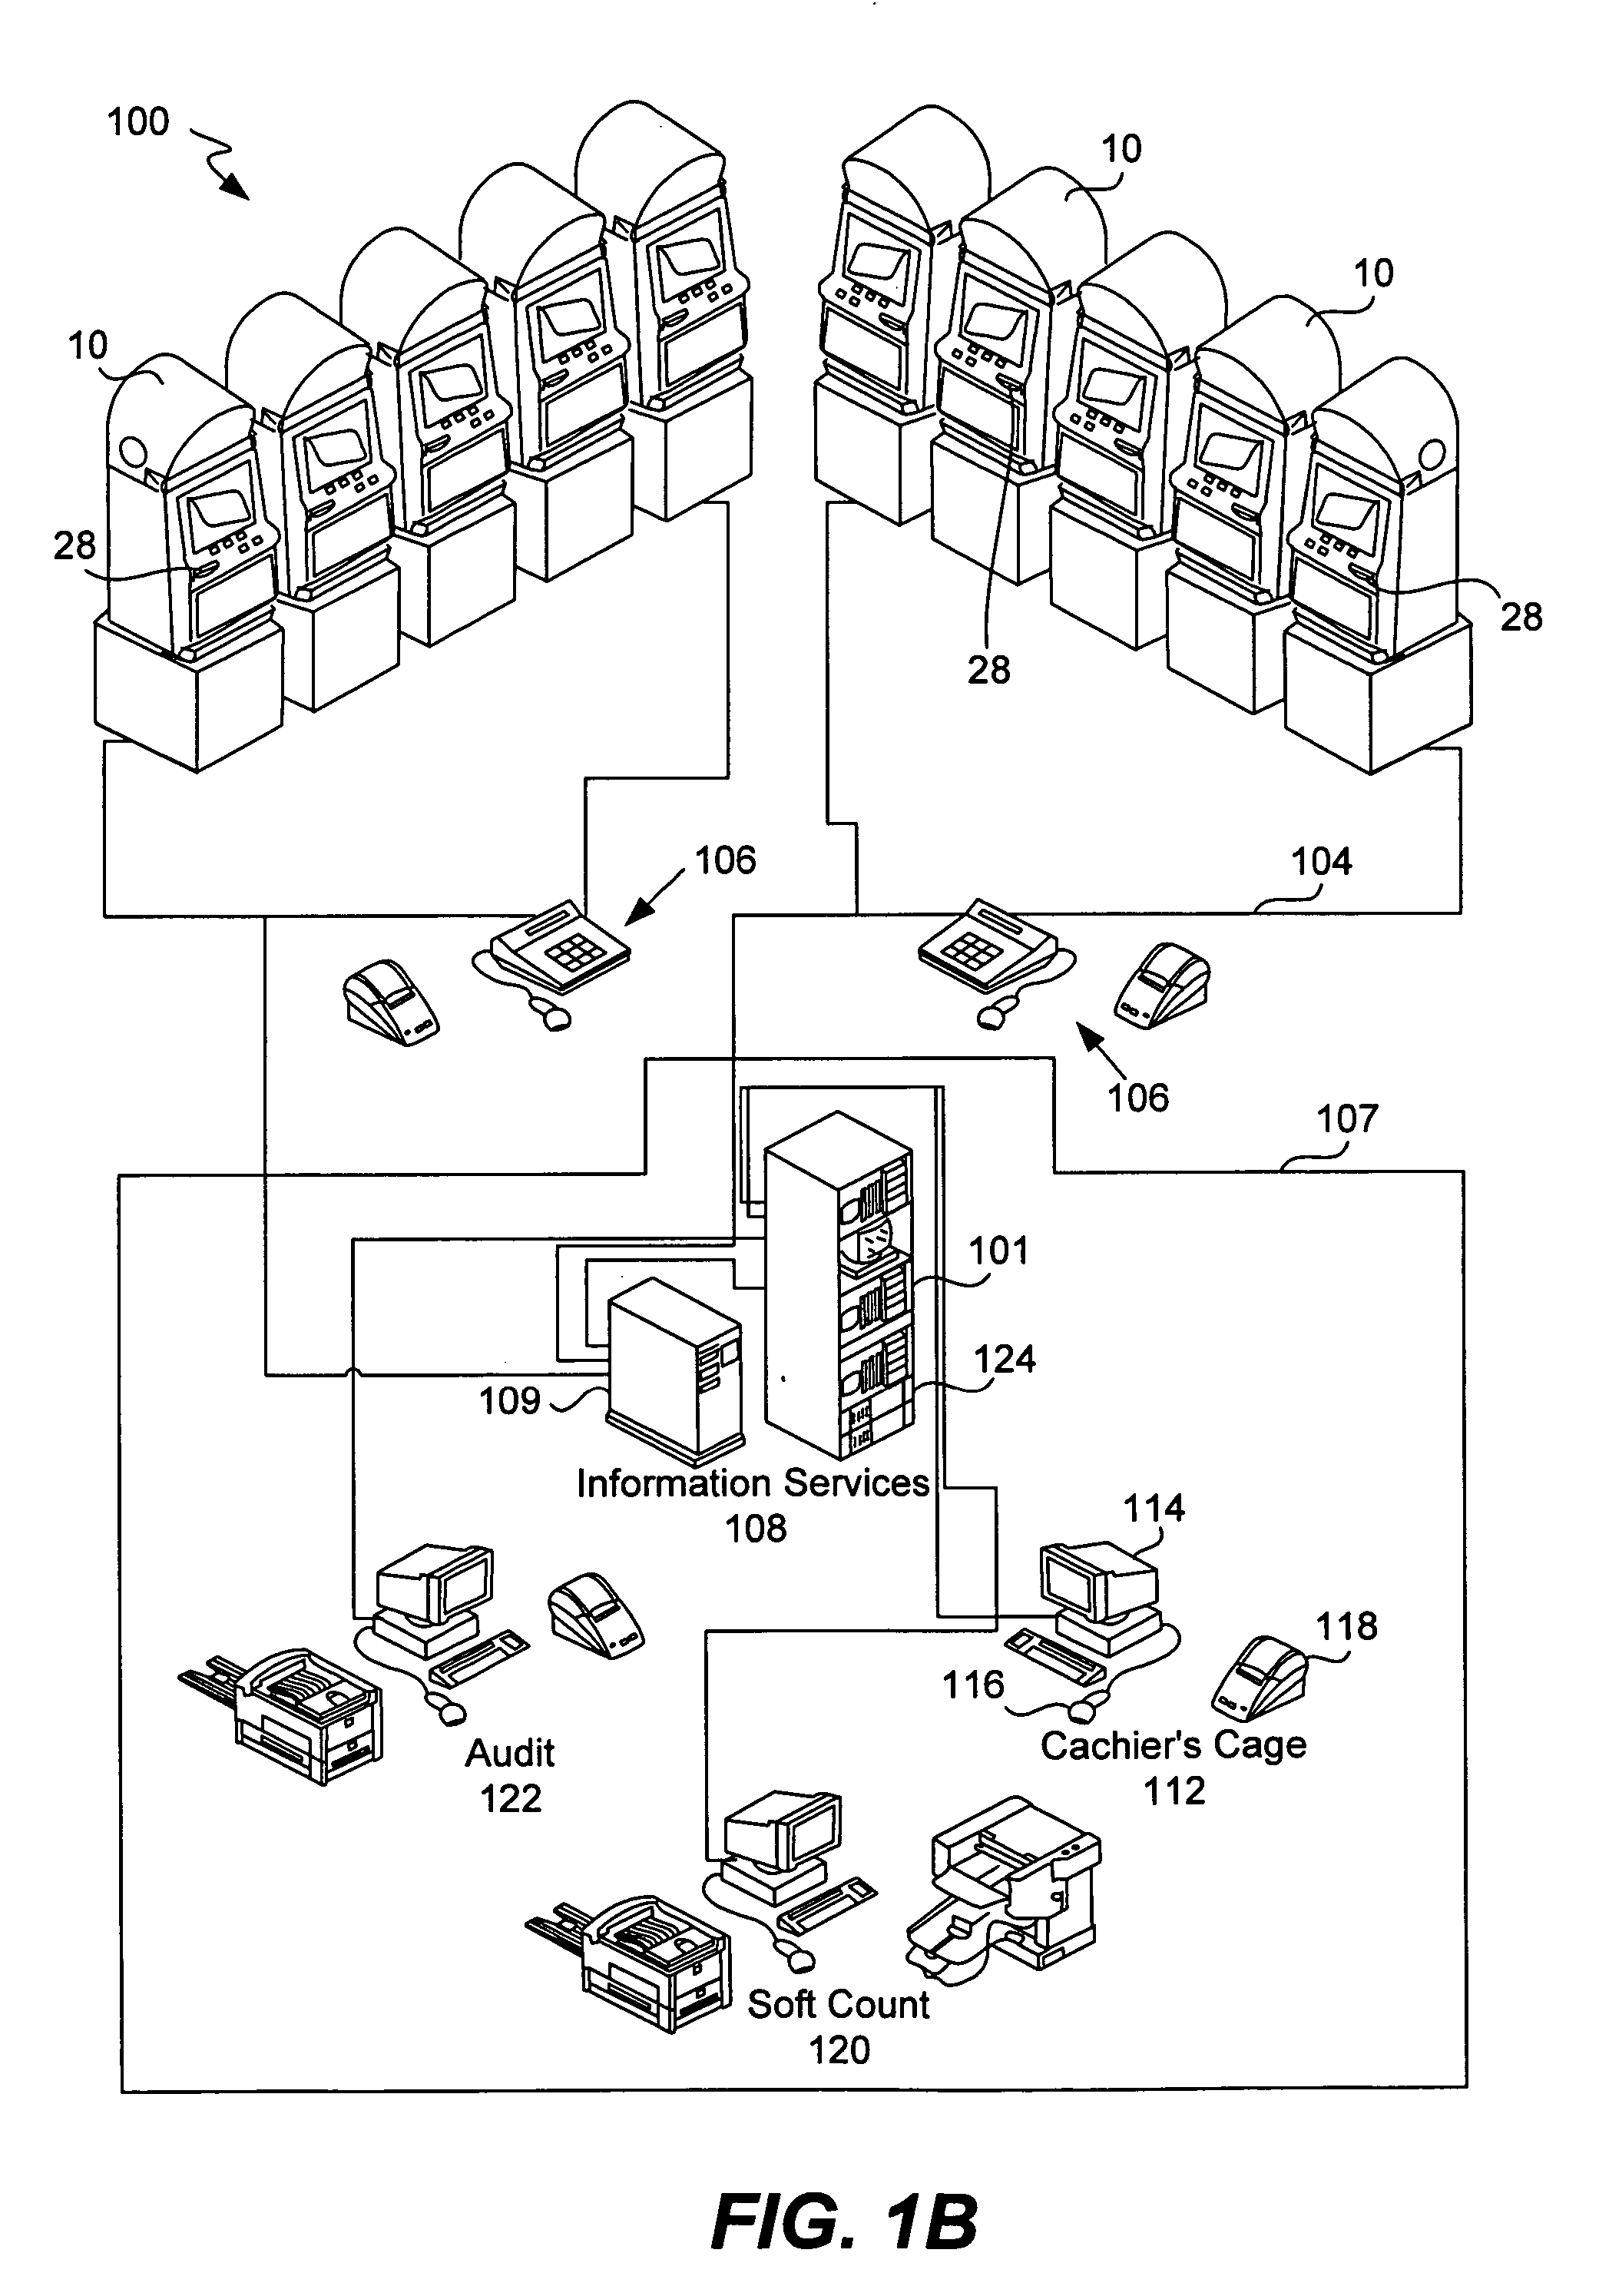 Method for securely exchanging promotional ticket related information